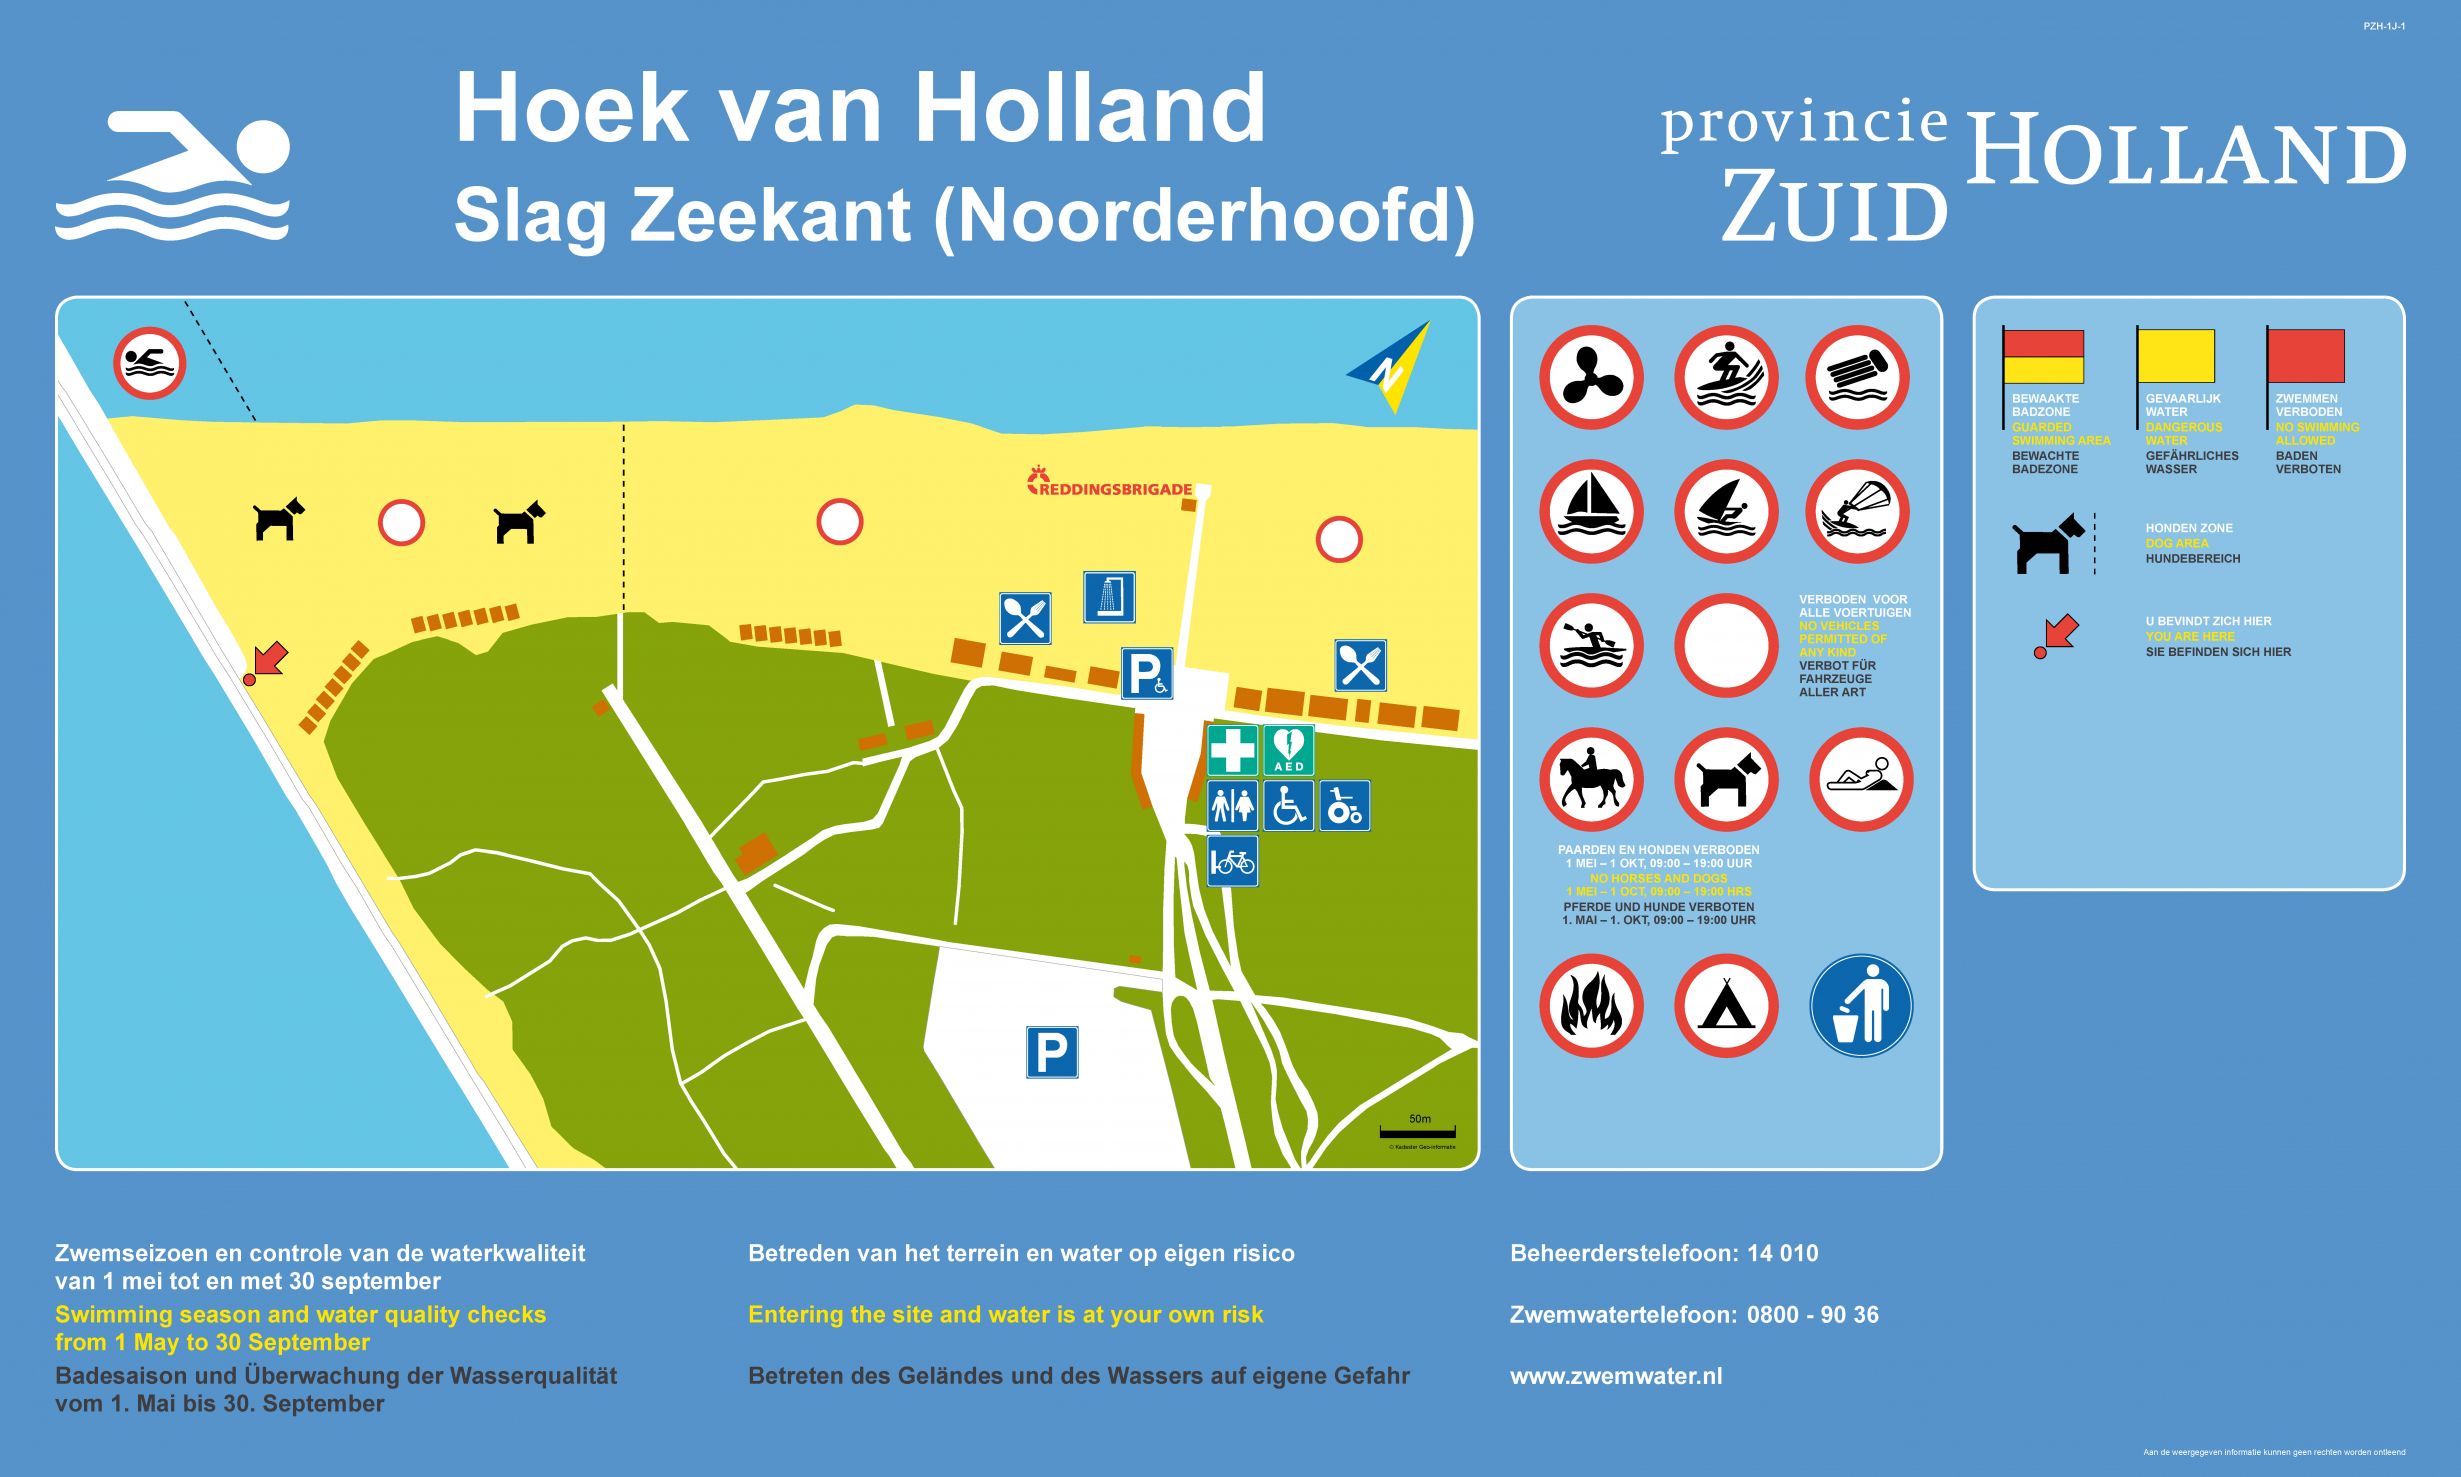 The information board at the swimming location Hoek van Holland